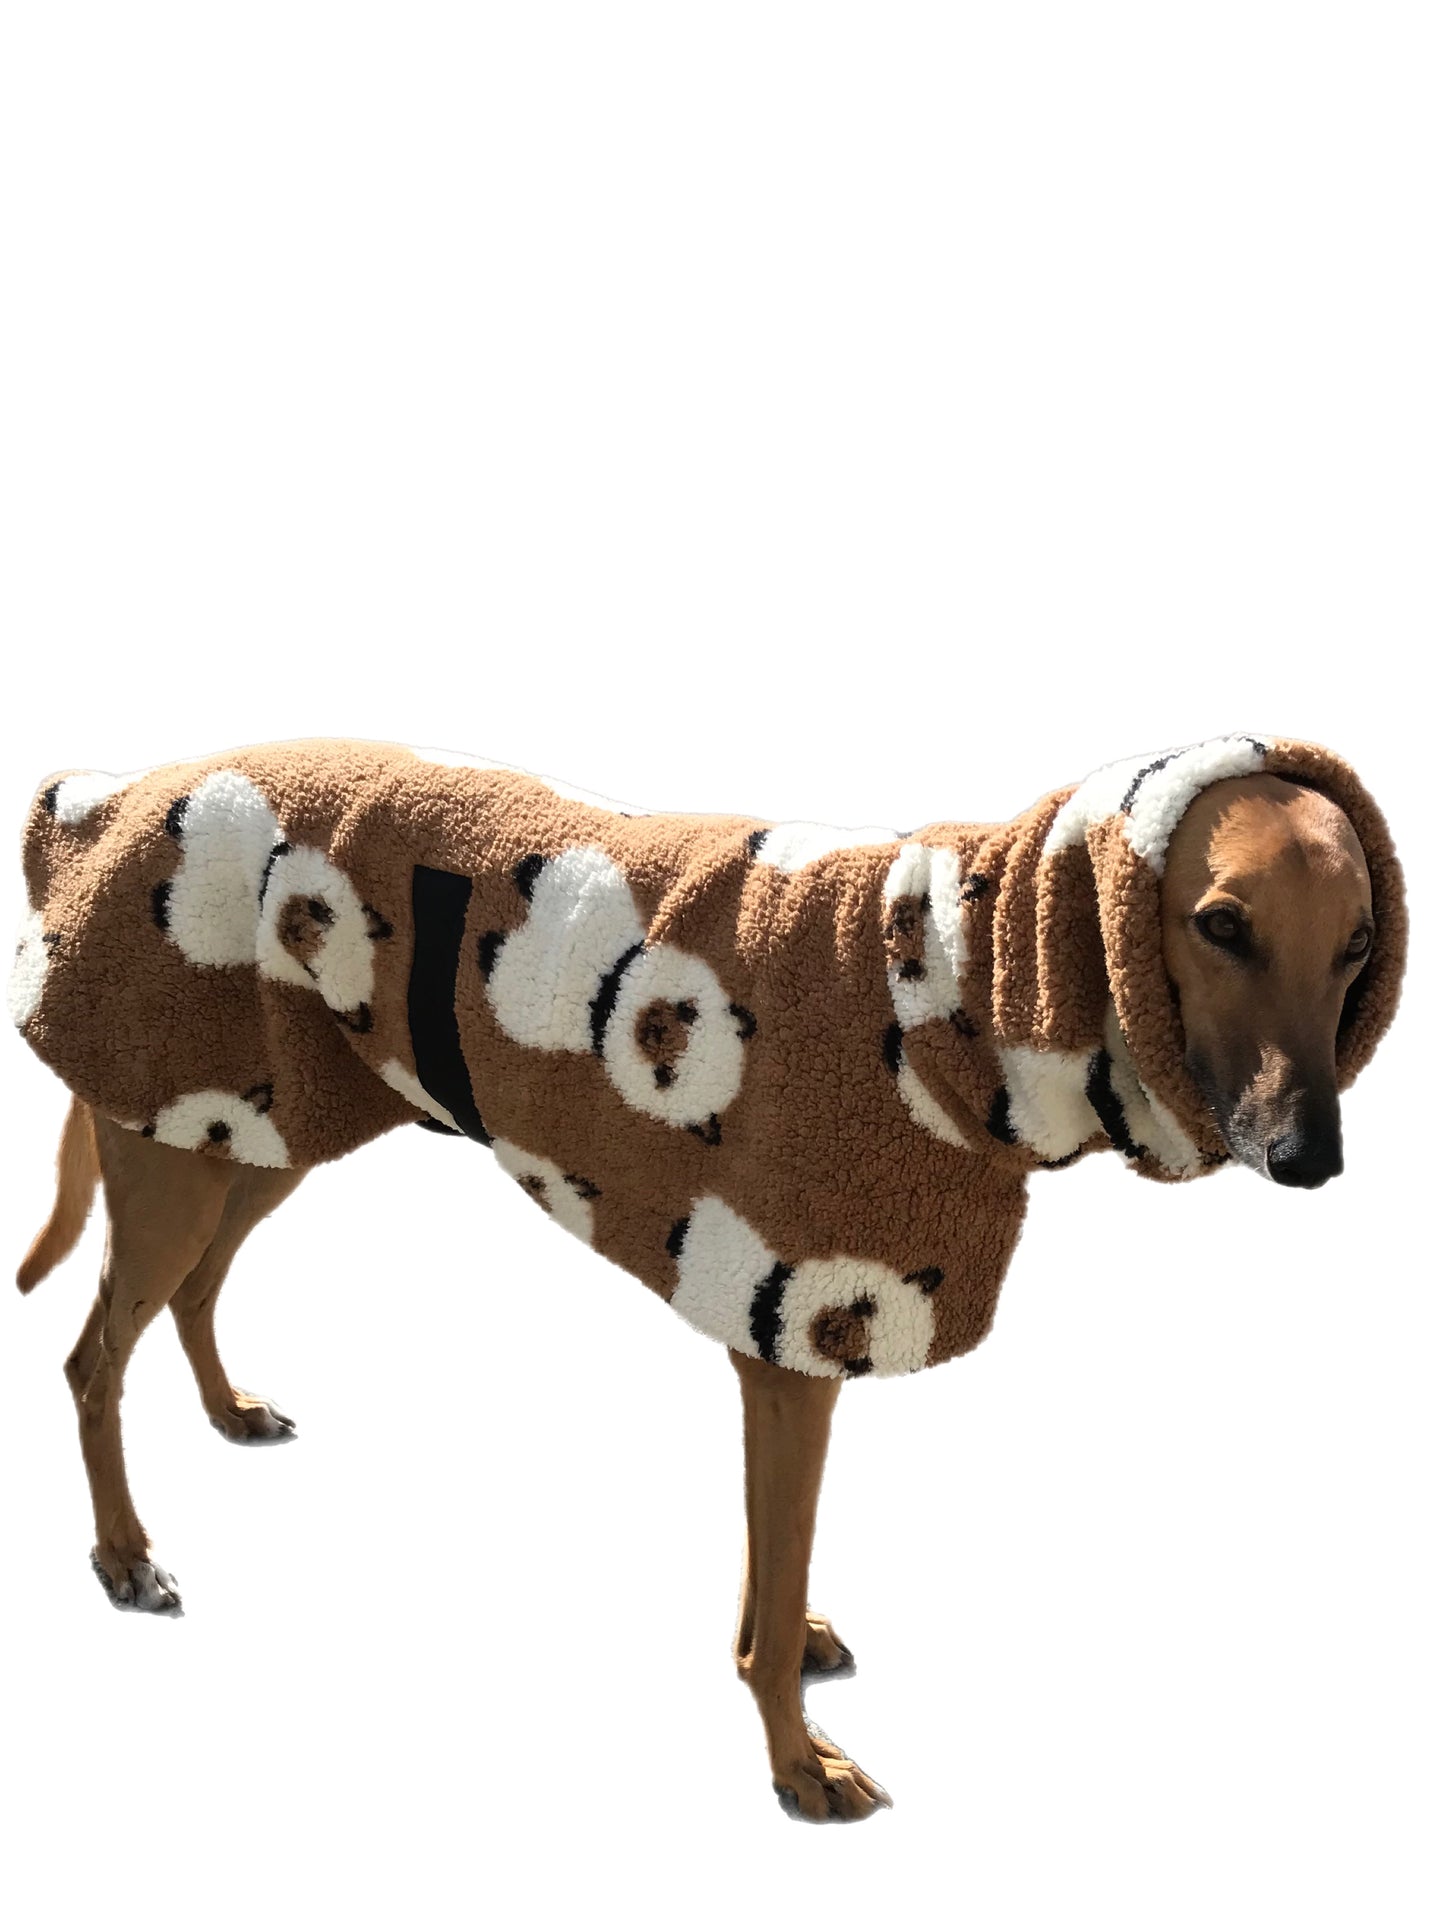 Extra thick Sherpa deluxe style greyhound coat with snuggly wide neck roll